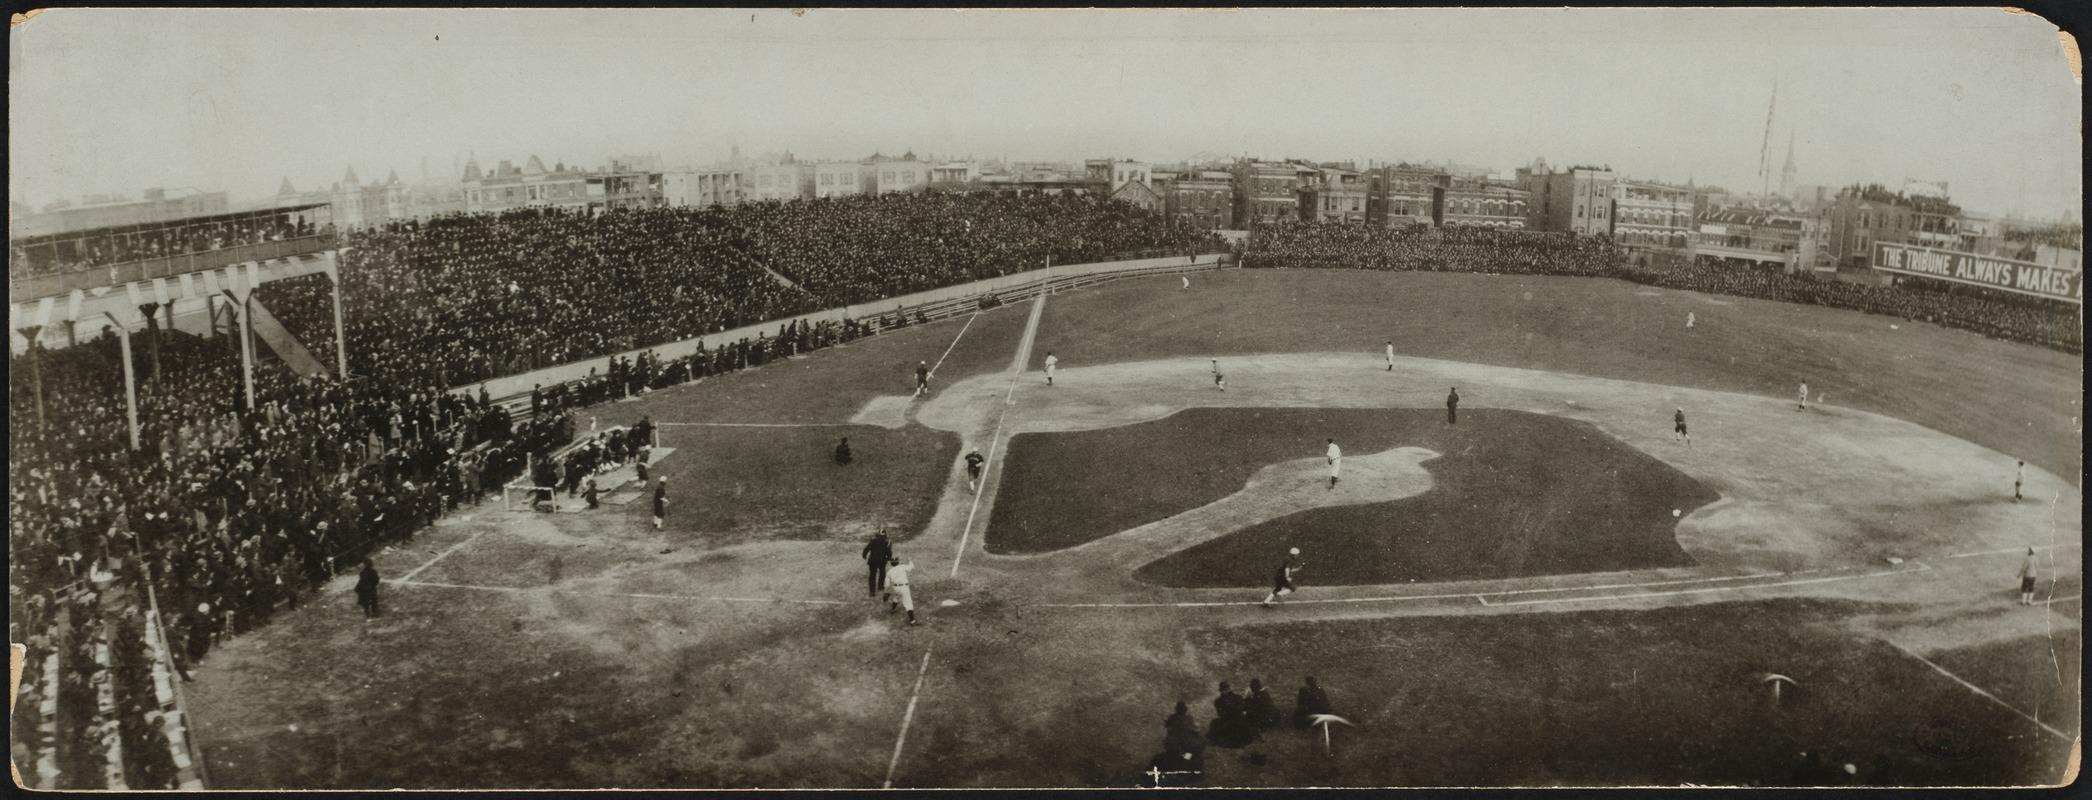 West Side Grounds, 1906